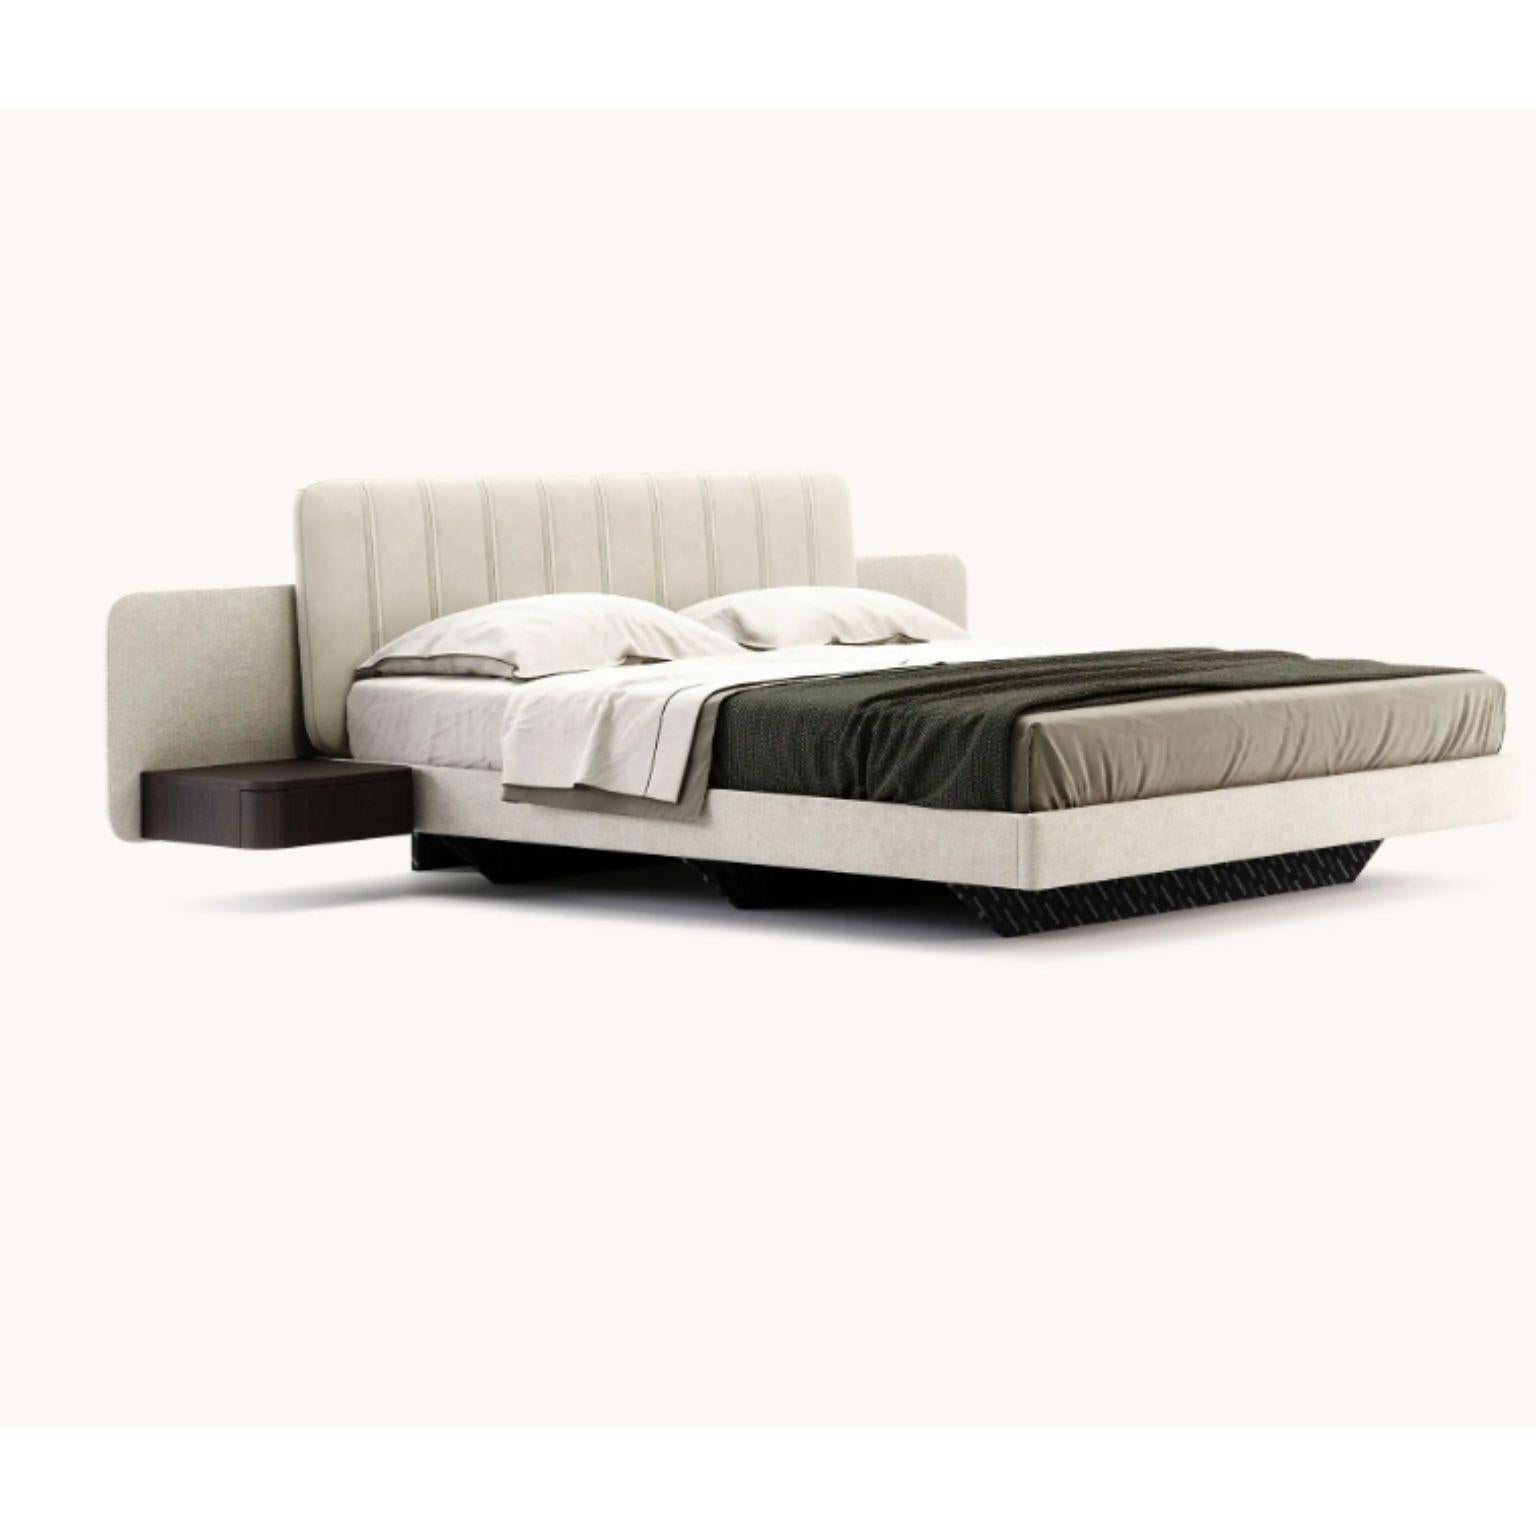 Queen size Amanda bed by Domkapa
Materials: Fumé oak, microfibers (Tarn 01), fiber (Helmand 05). 
Dimensions: W 281 x D 223 x H 93 cm.
Also available in different materials.

An outstanding design inspired by the contemporary traces we all